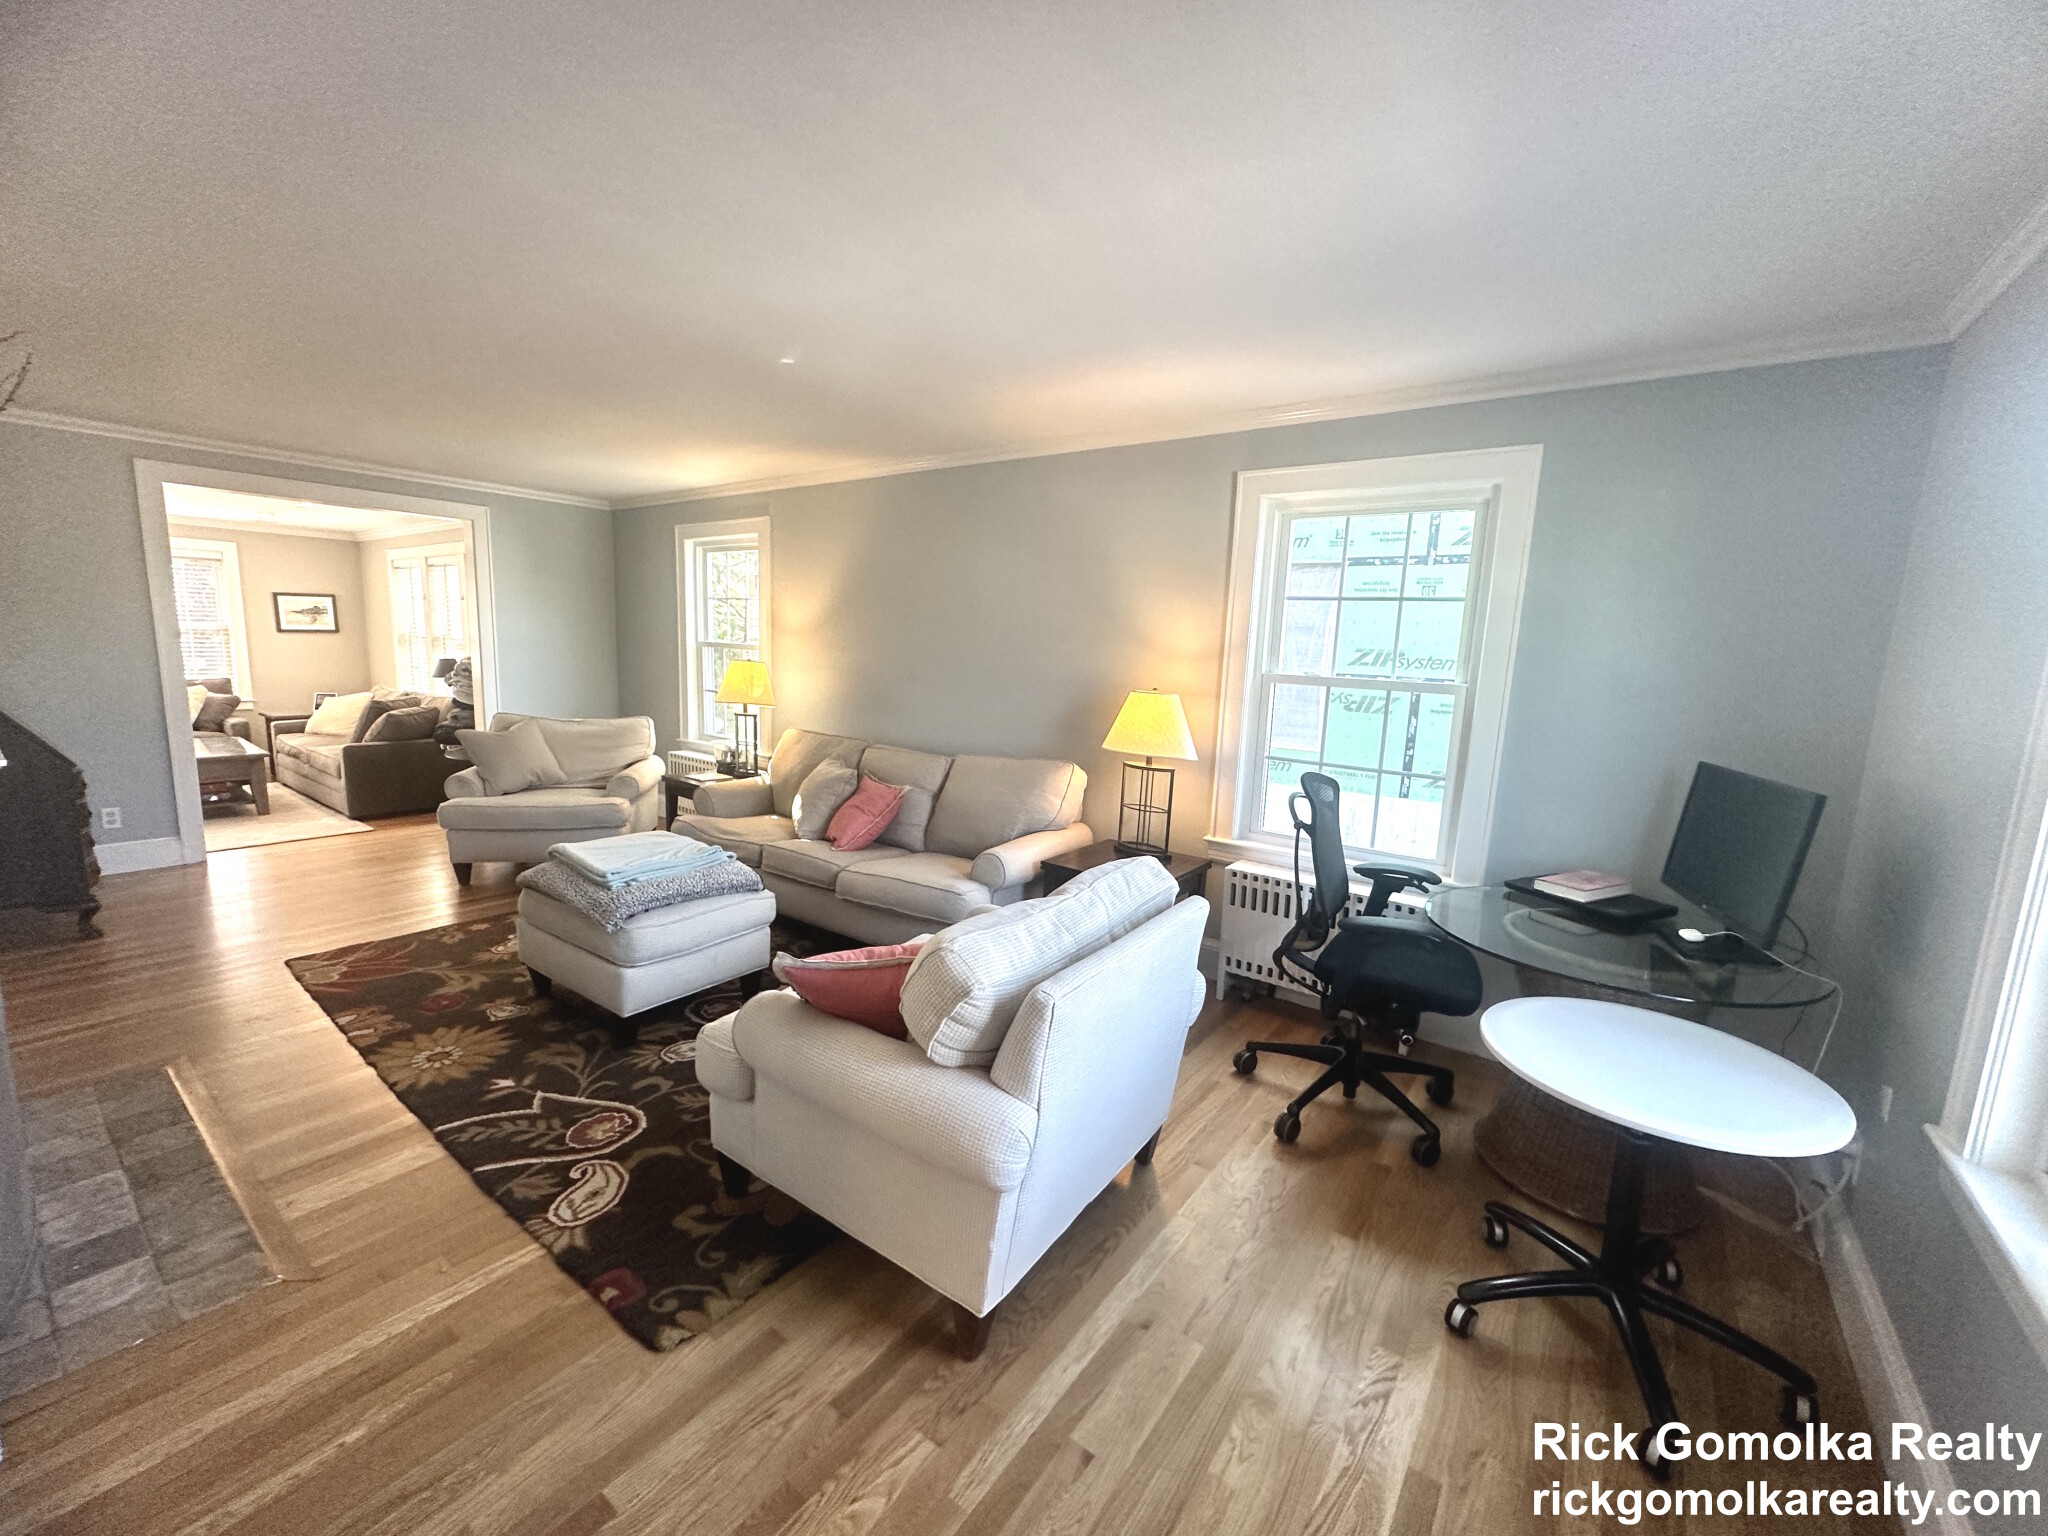 Photos of apartment on Florence Rd.,Waltham MA 02453